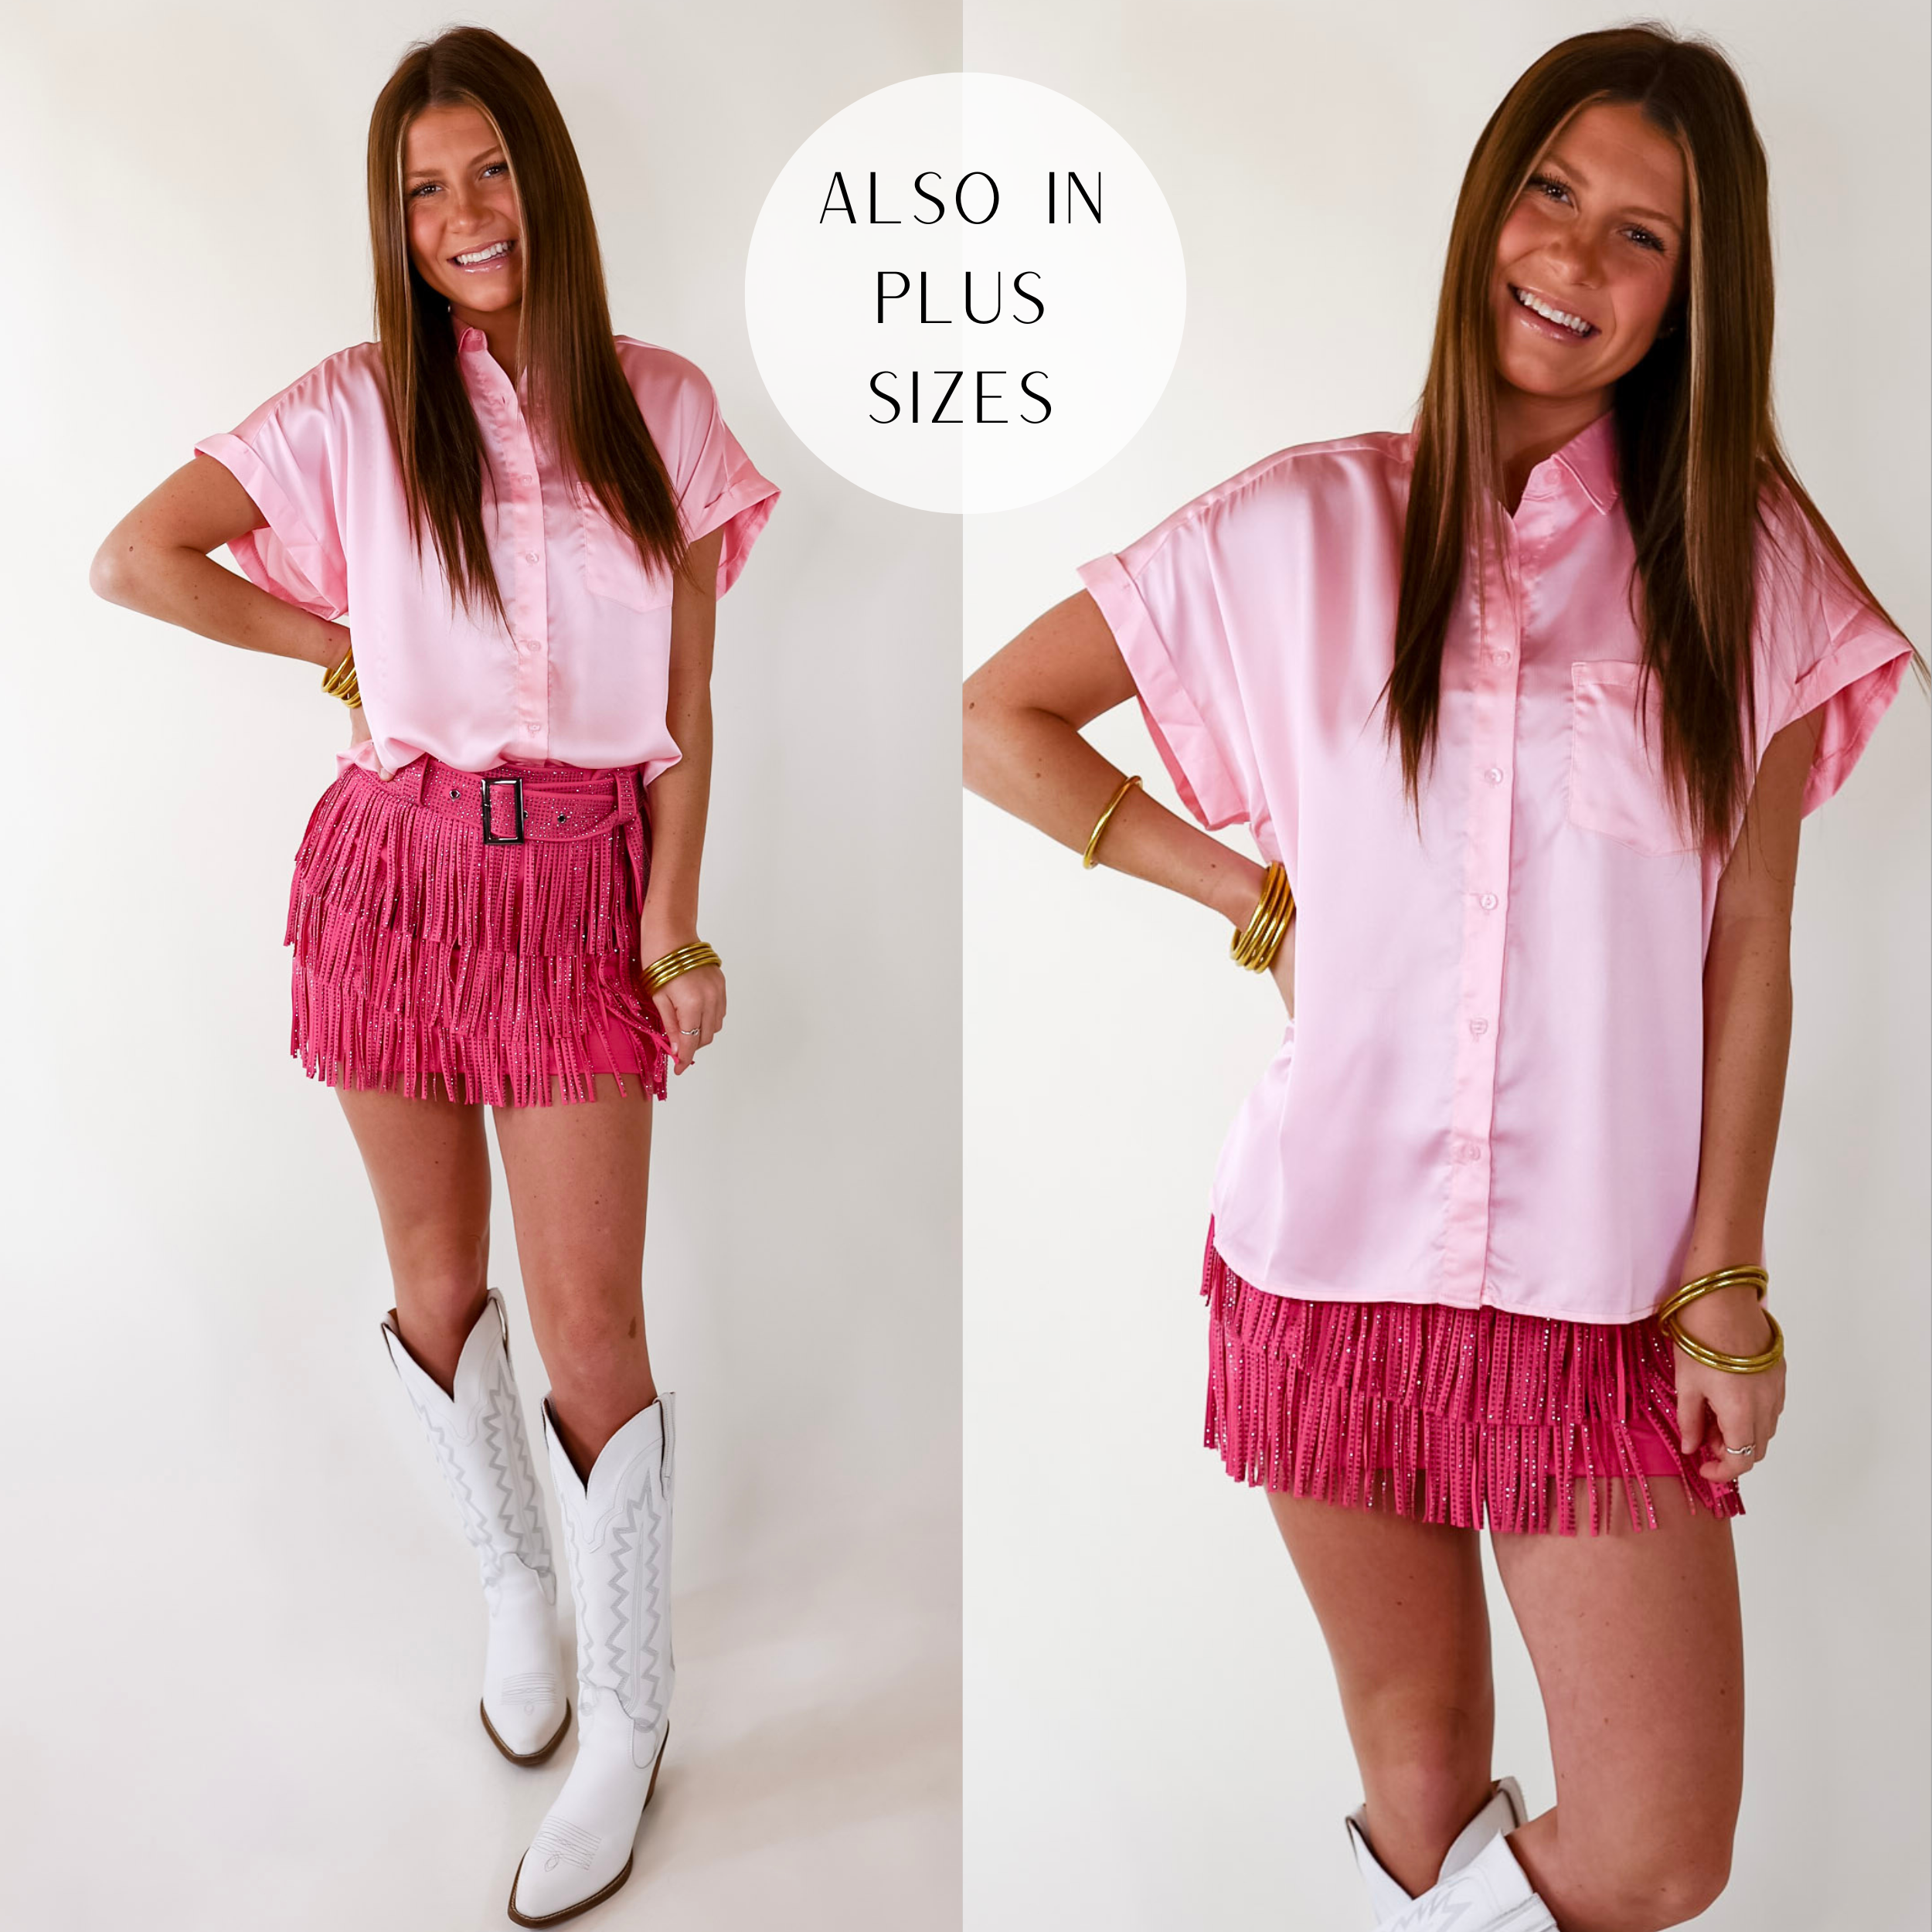 Model is wearing a button down top with short sleeves in light pink with a white background.